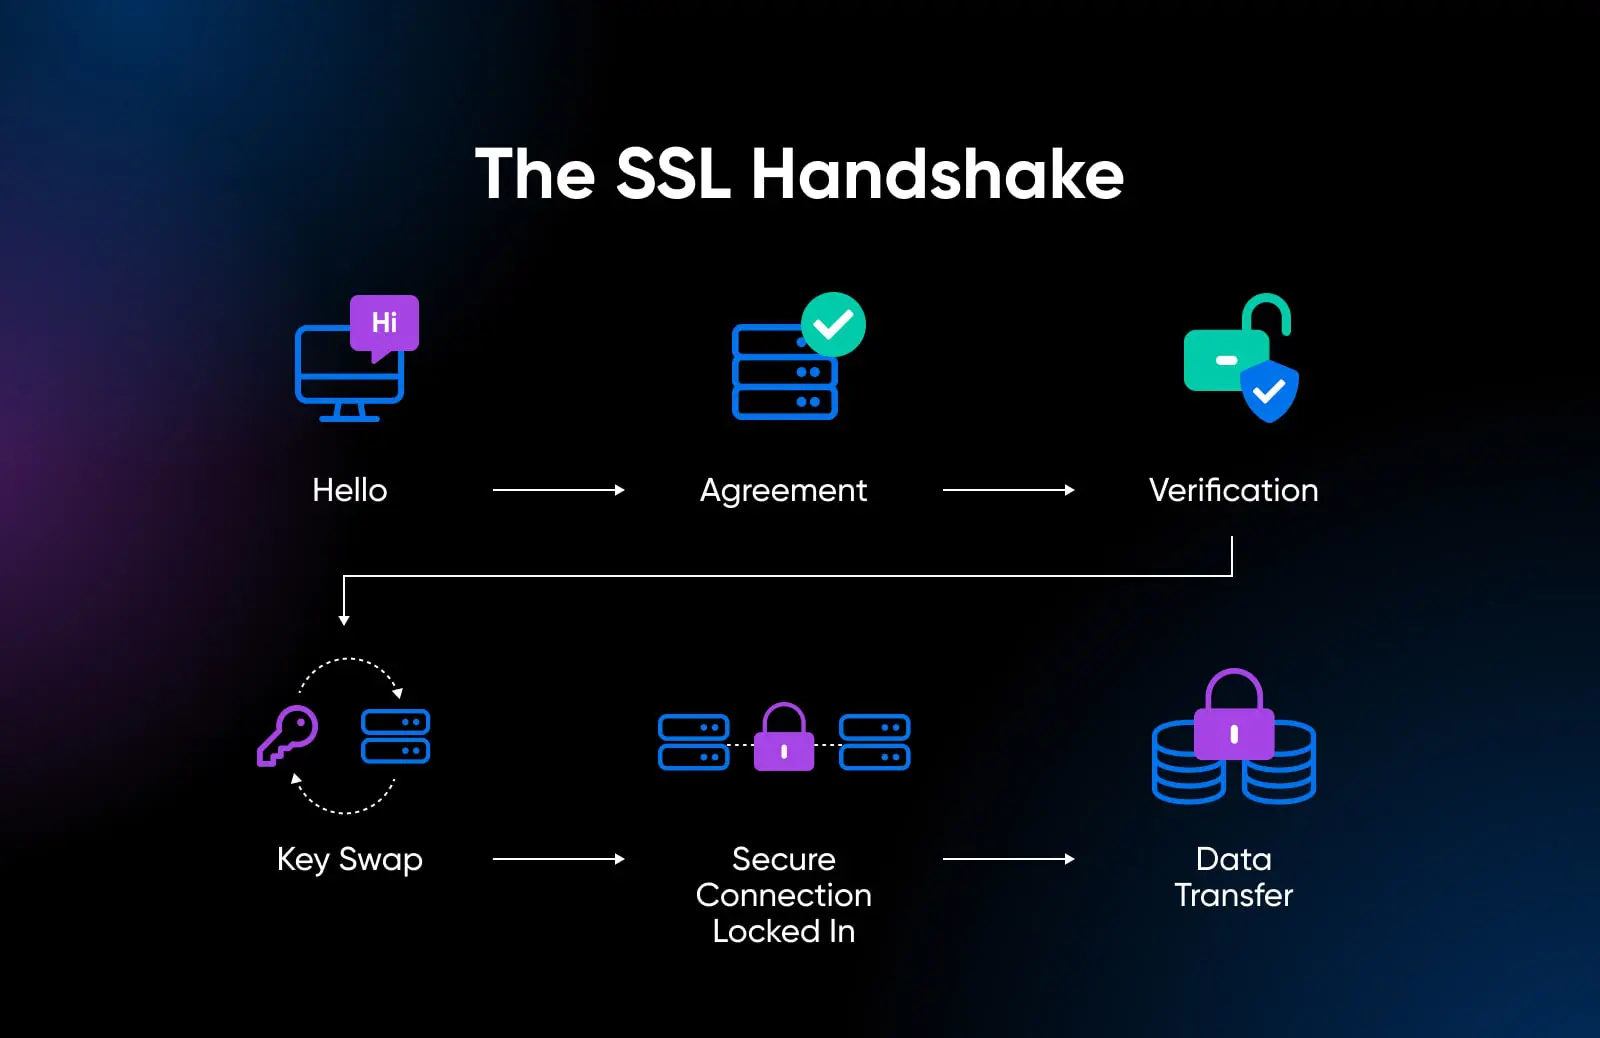 the SSL handshake starts flows from hello to agreement to verification to key swap to secure connection log in to data transfer